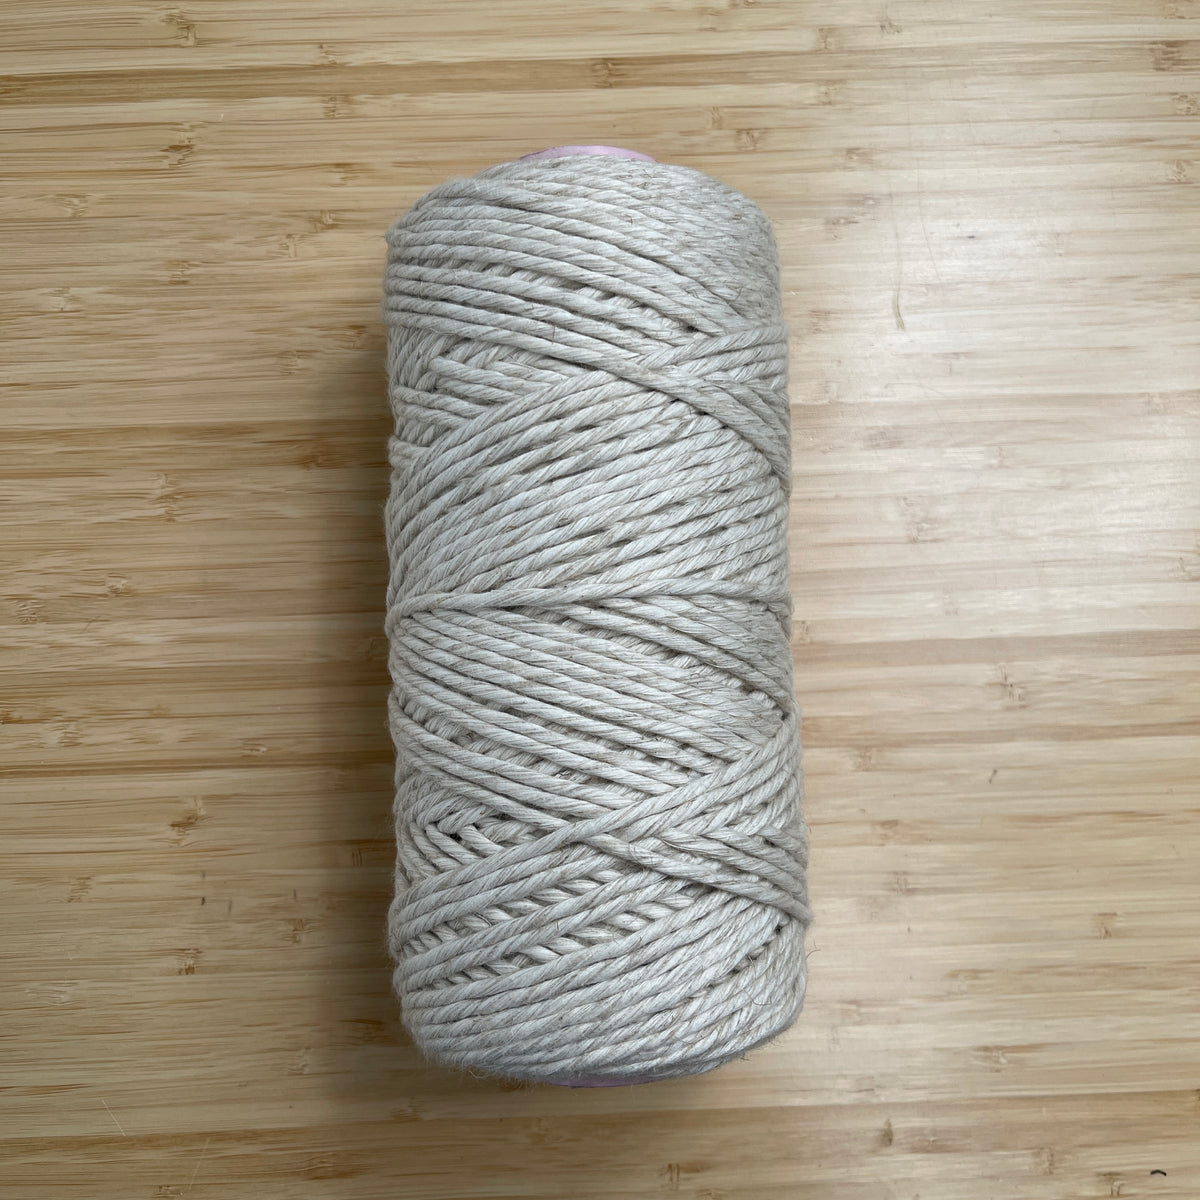 Cottolin Macrame String - 500g Cone [Discontinued]